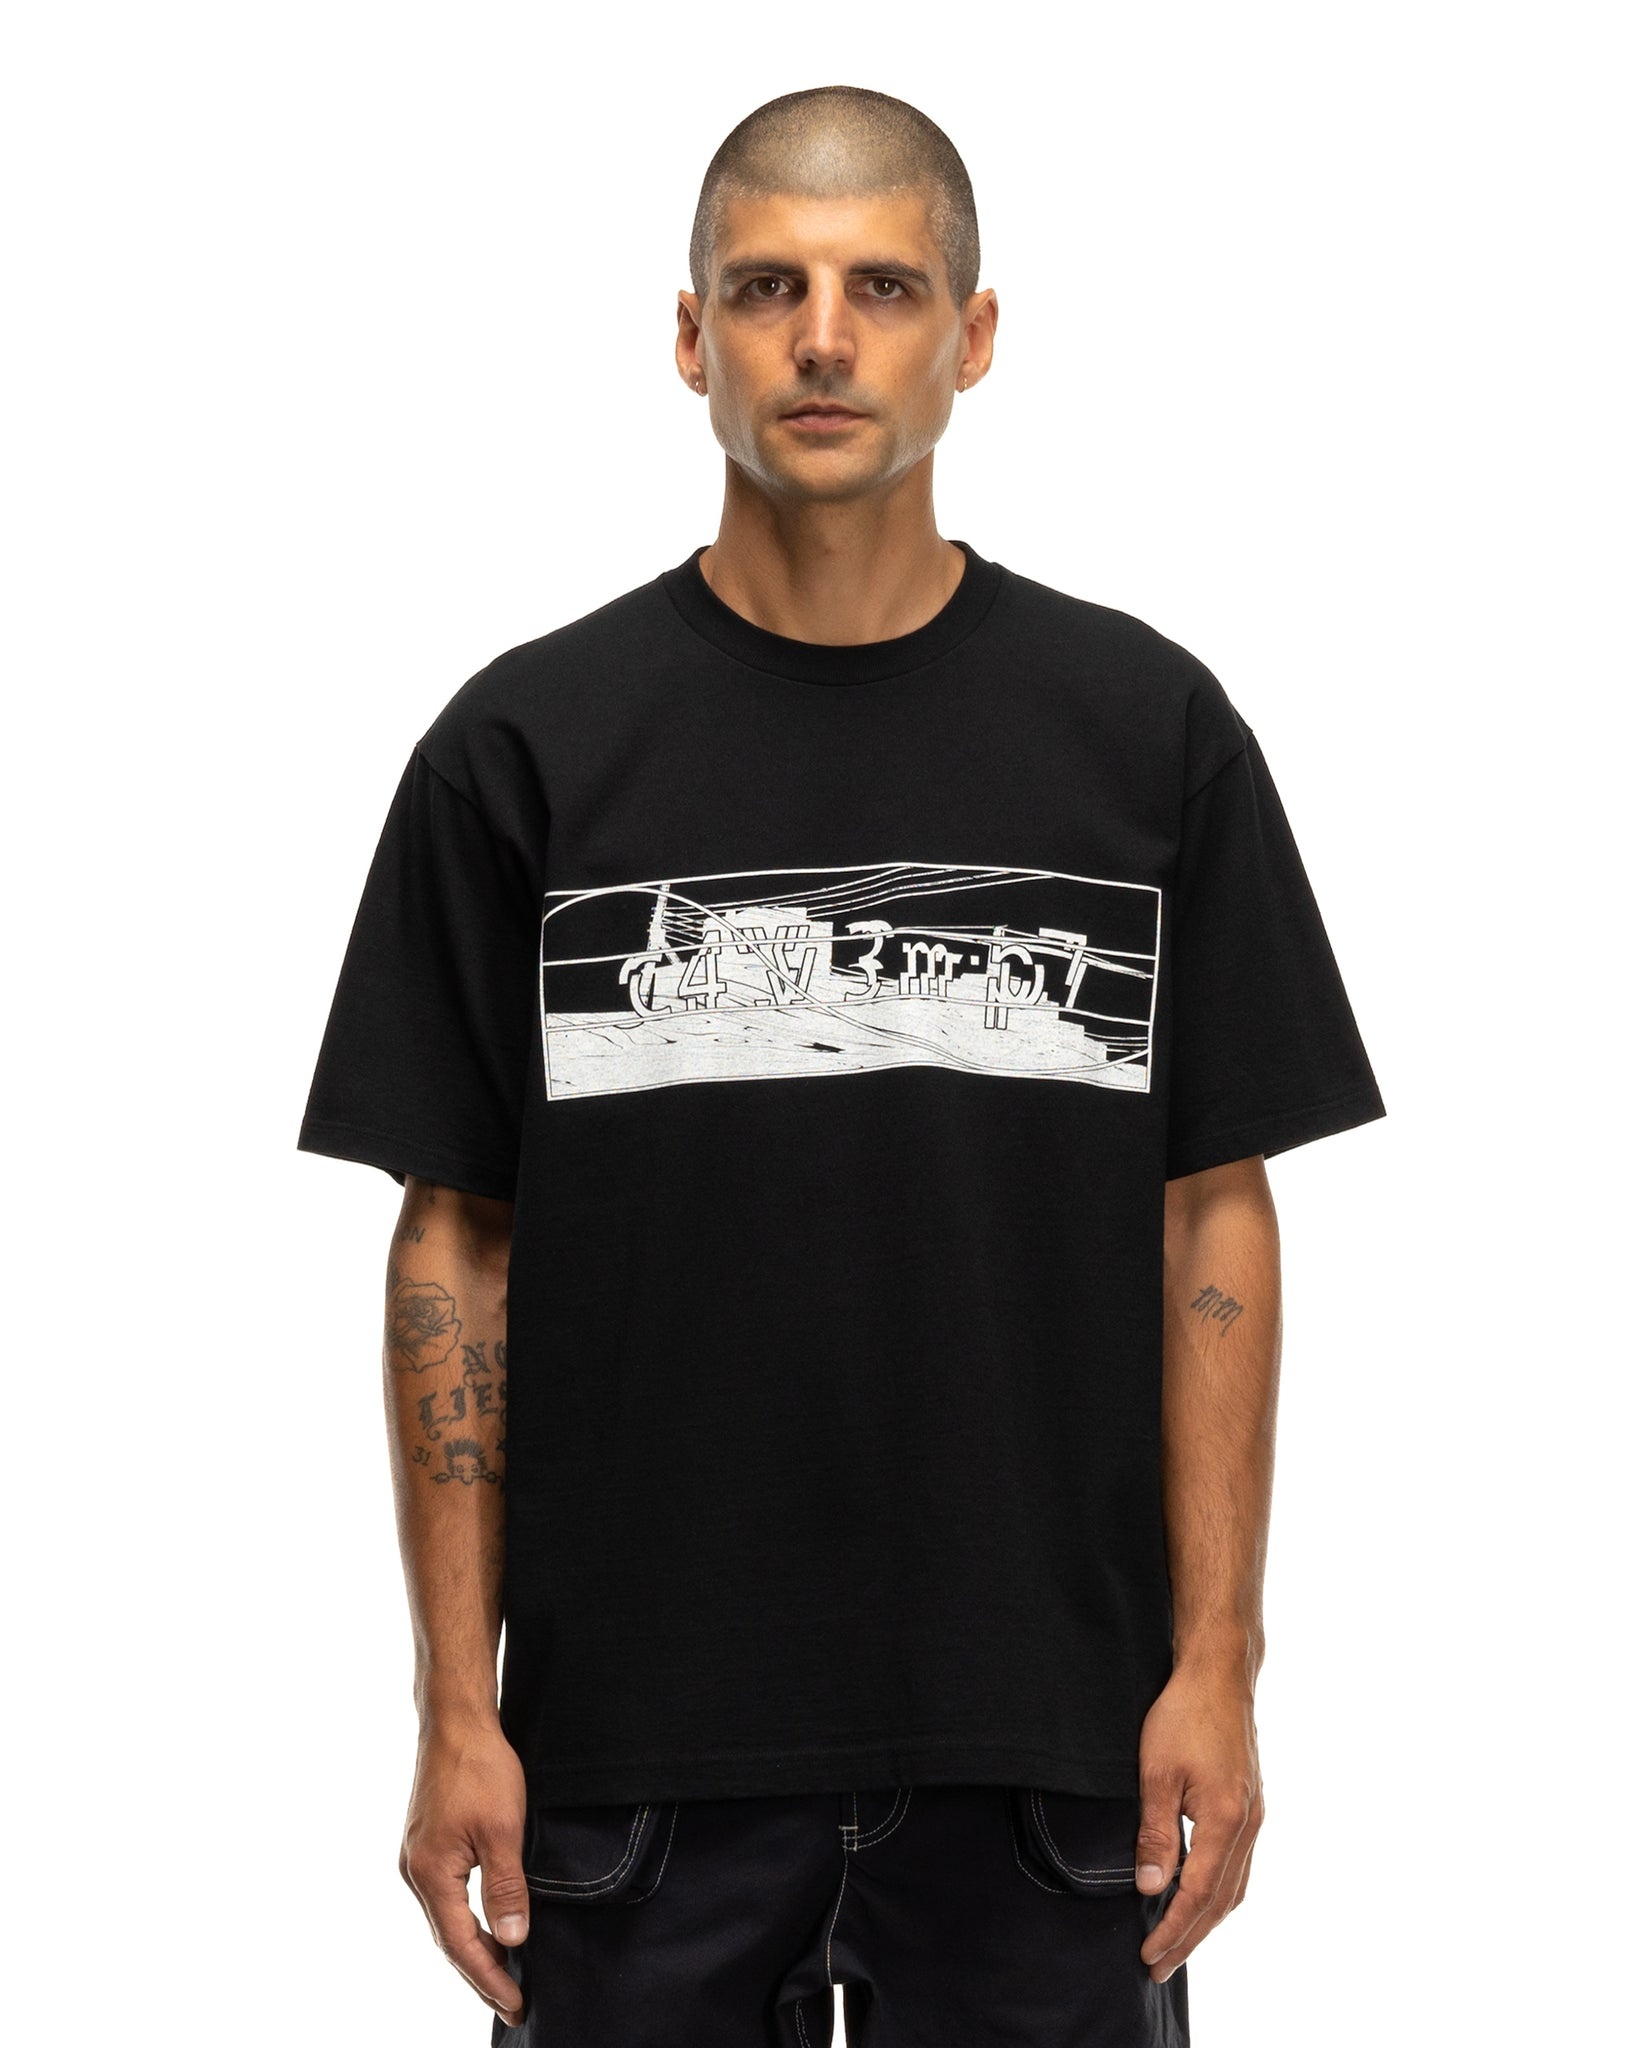 MARKS OF THE END T-SHIRT BLACK - 5